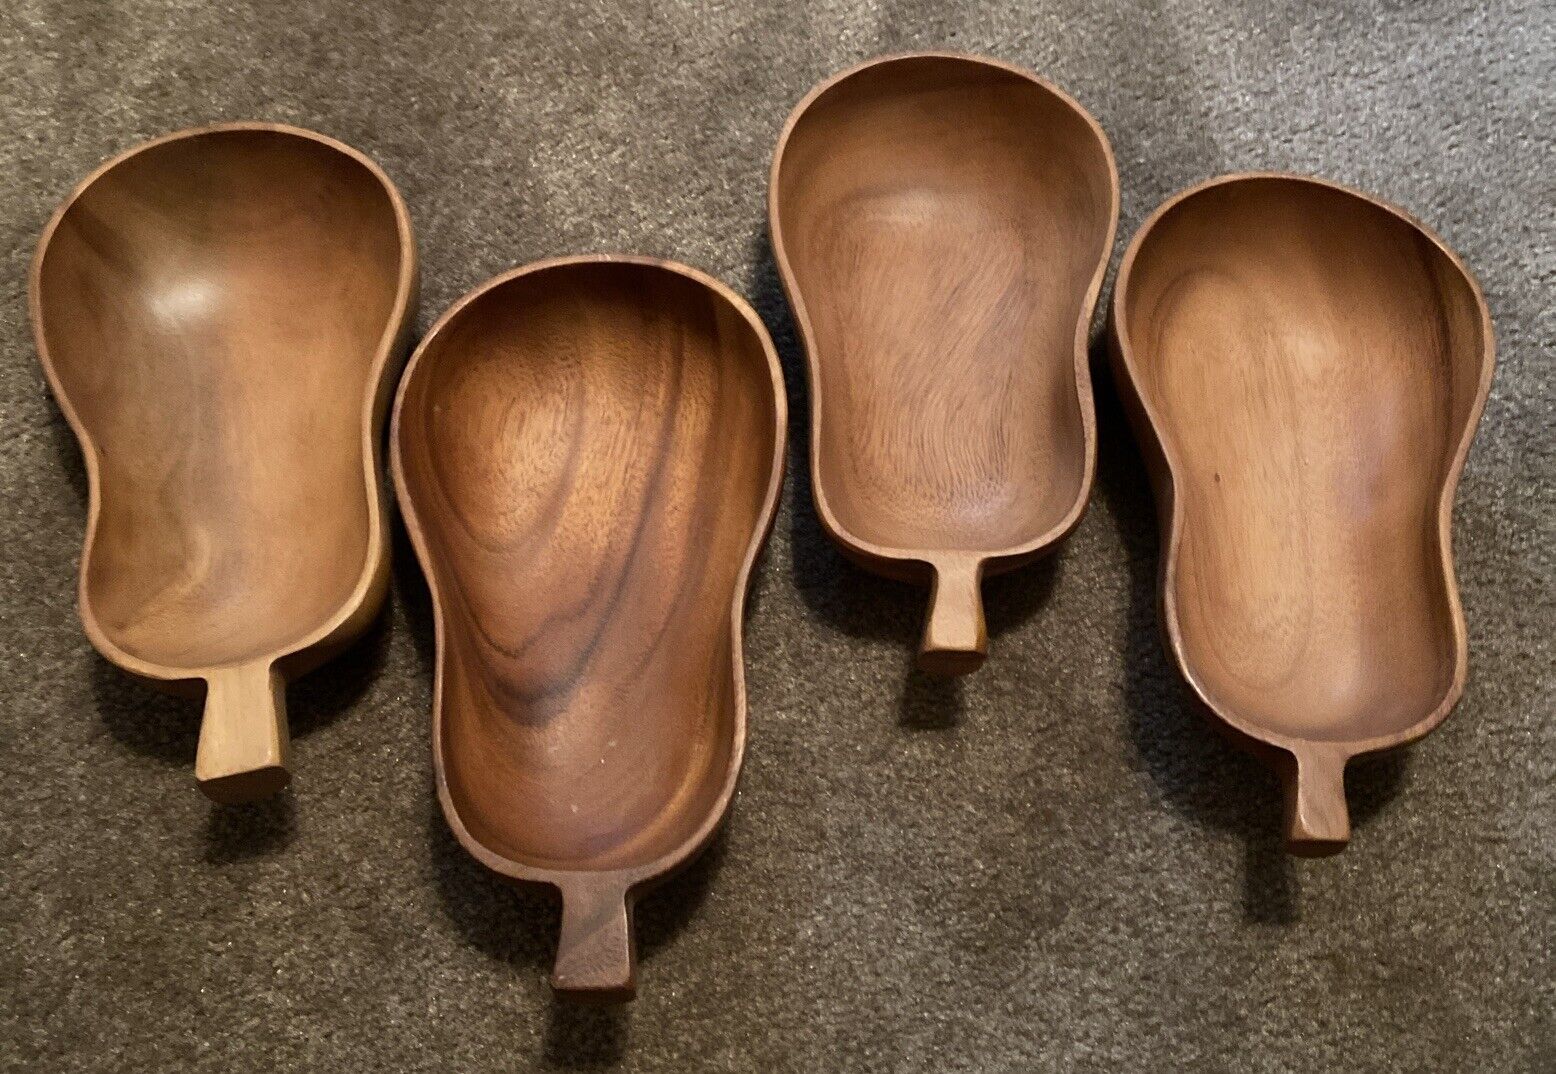 Handmade Wooden Bowls Pear Shaped From Philippines